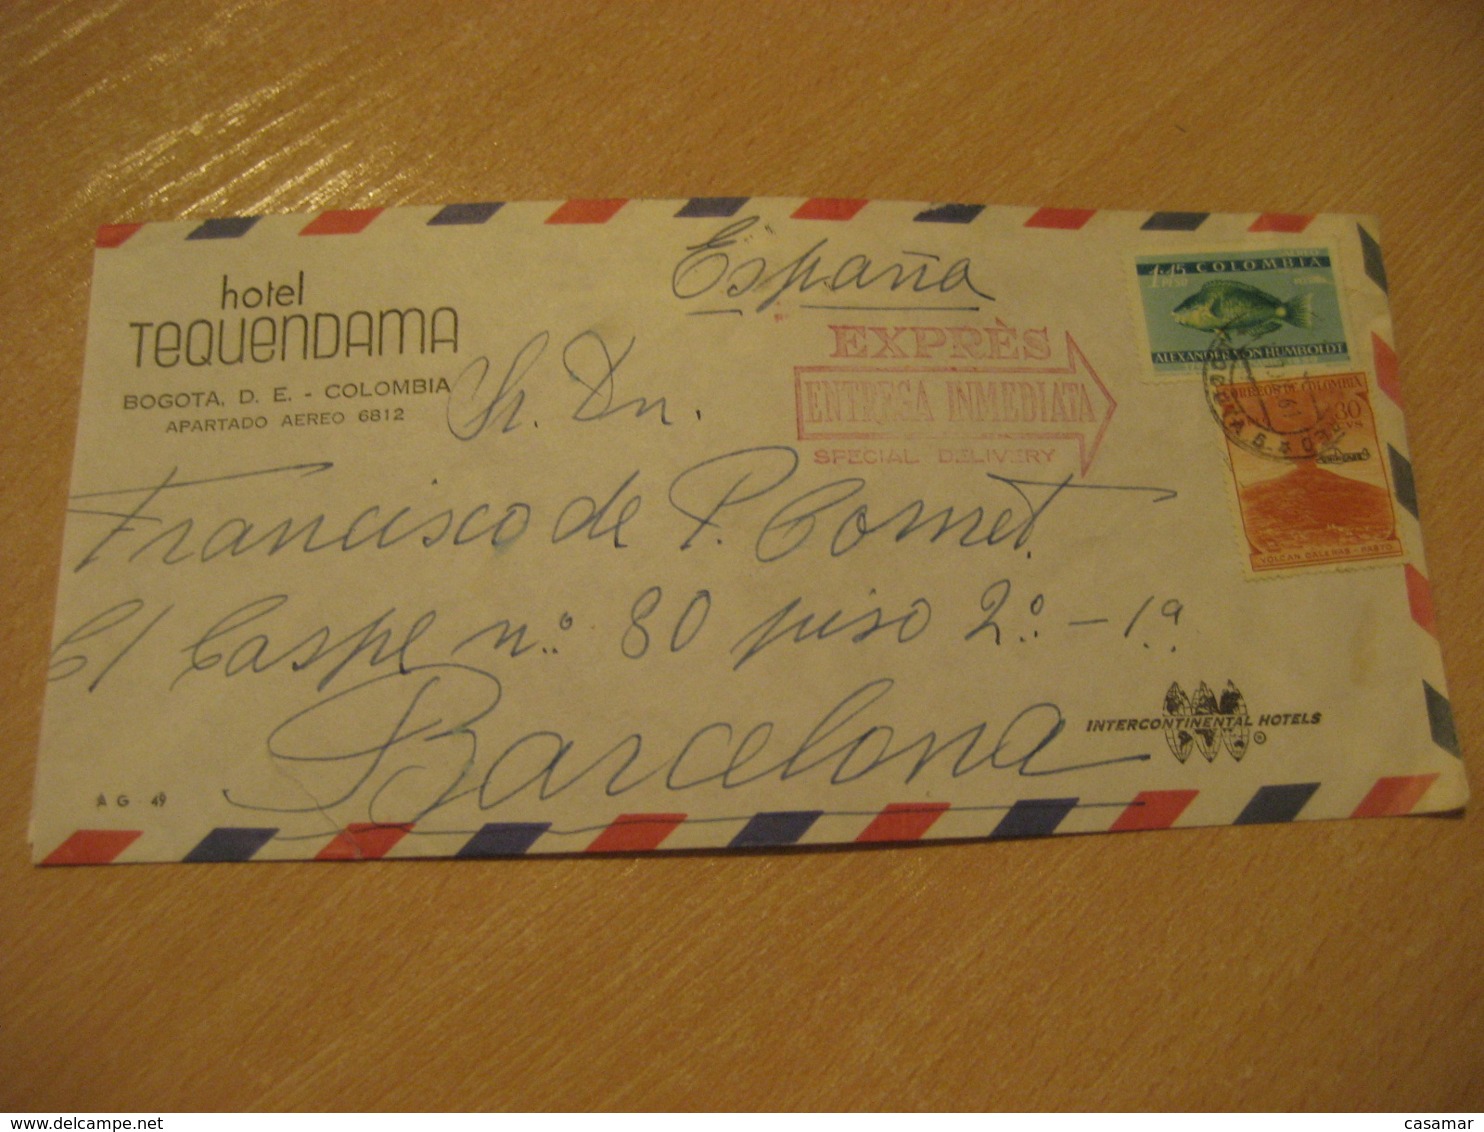 BOGOTA Hotel Tequendama 1961 To Barcelona Spain  EXPRES Special Delivery Correo Aereo Air Mail Cancel Cover COLOMBIA - Colombie